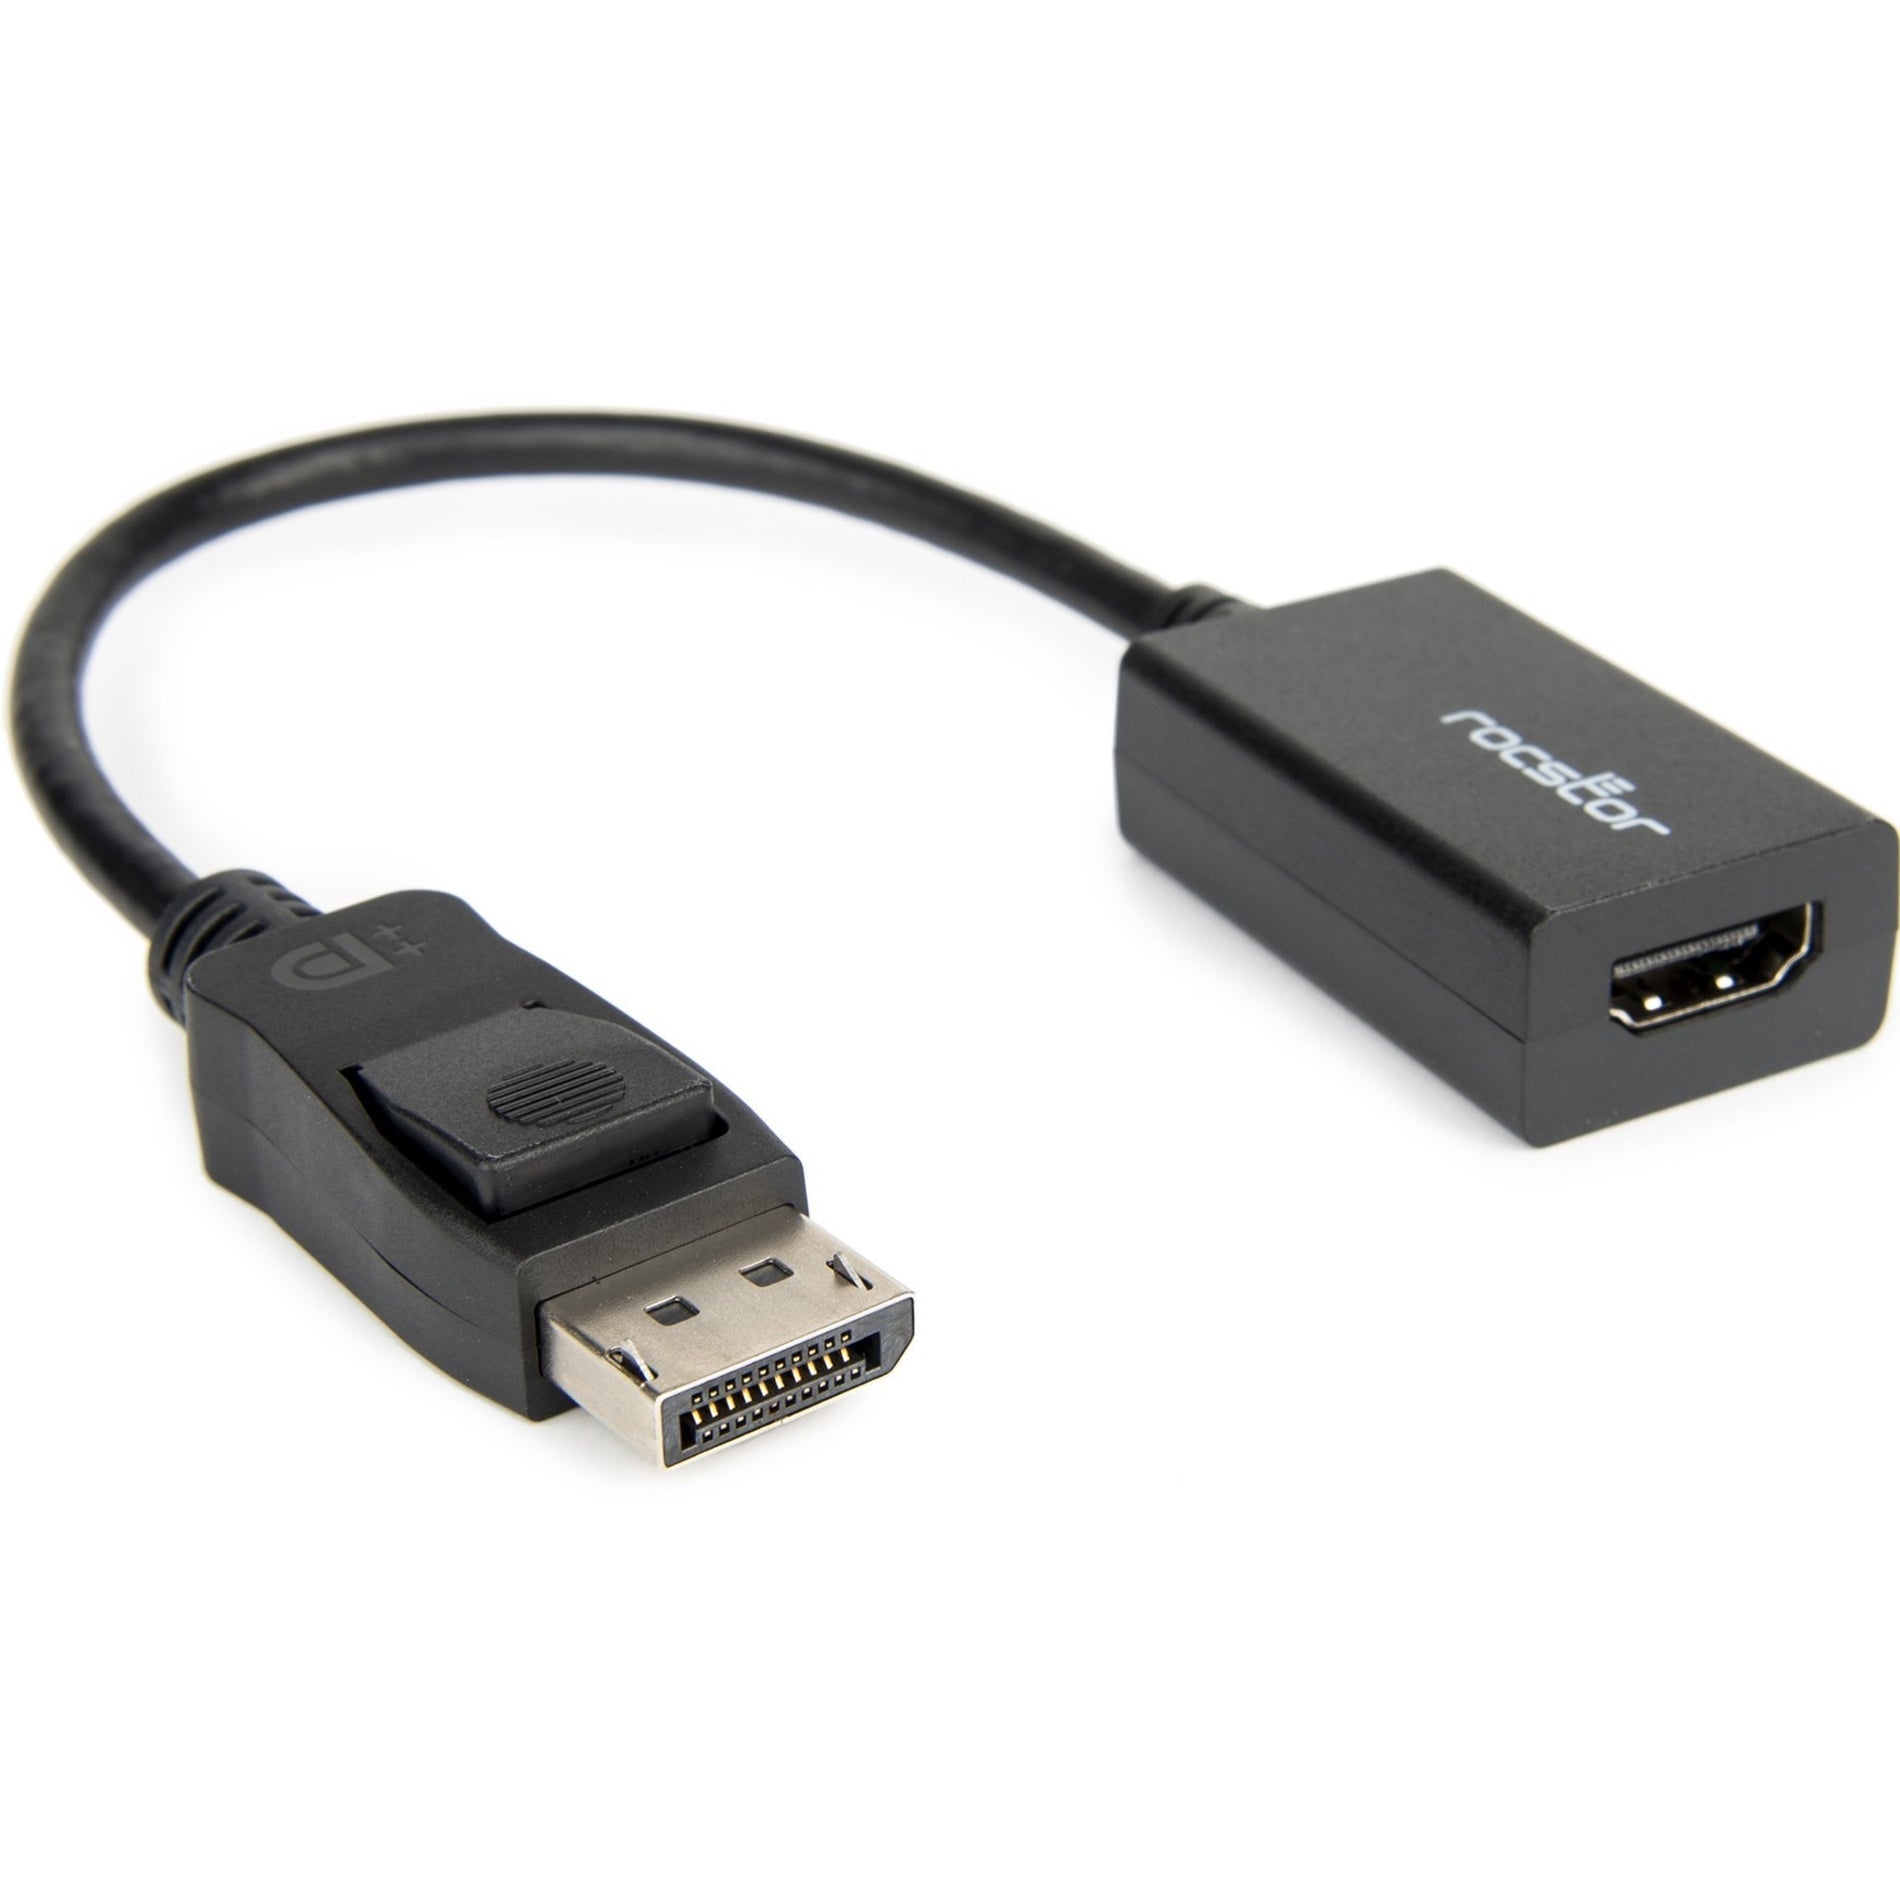 Rocstor Y10A101-B1-5PK DisplayPort/HDMI Audio/Video Adapter, Plug and Play, Lightweight